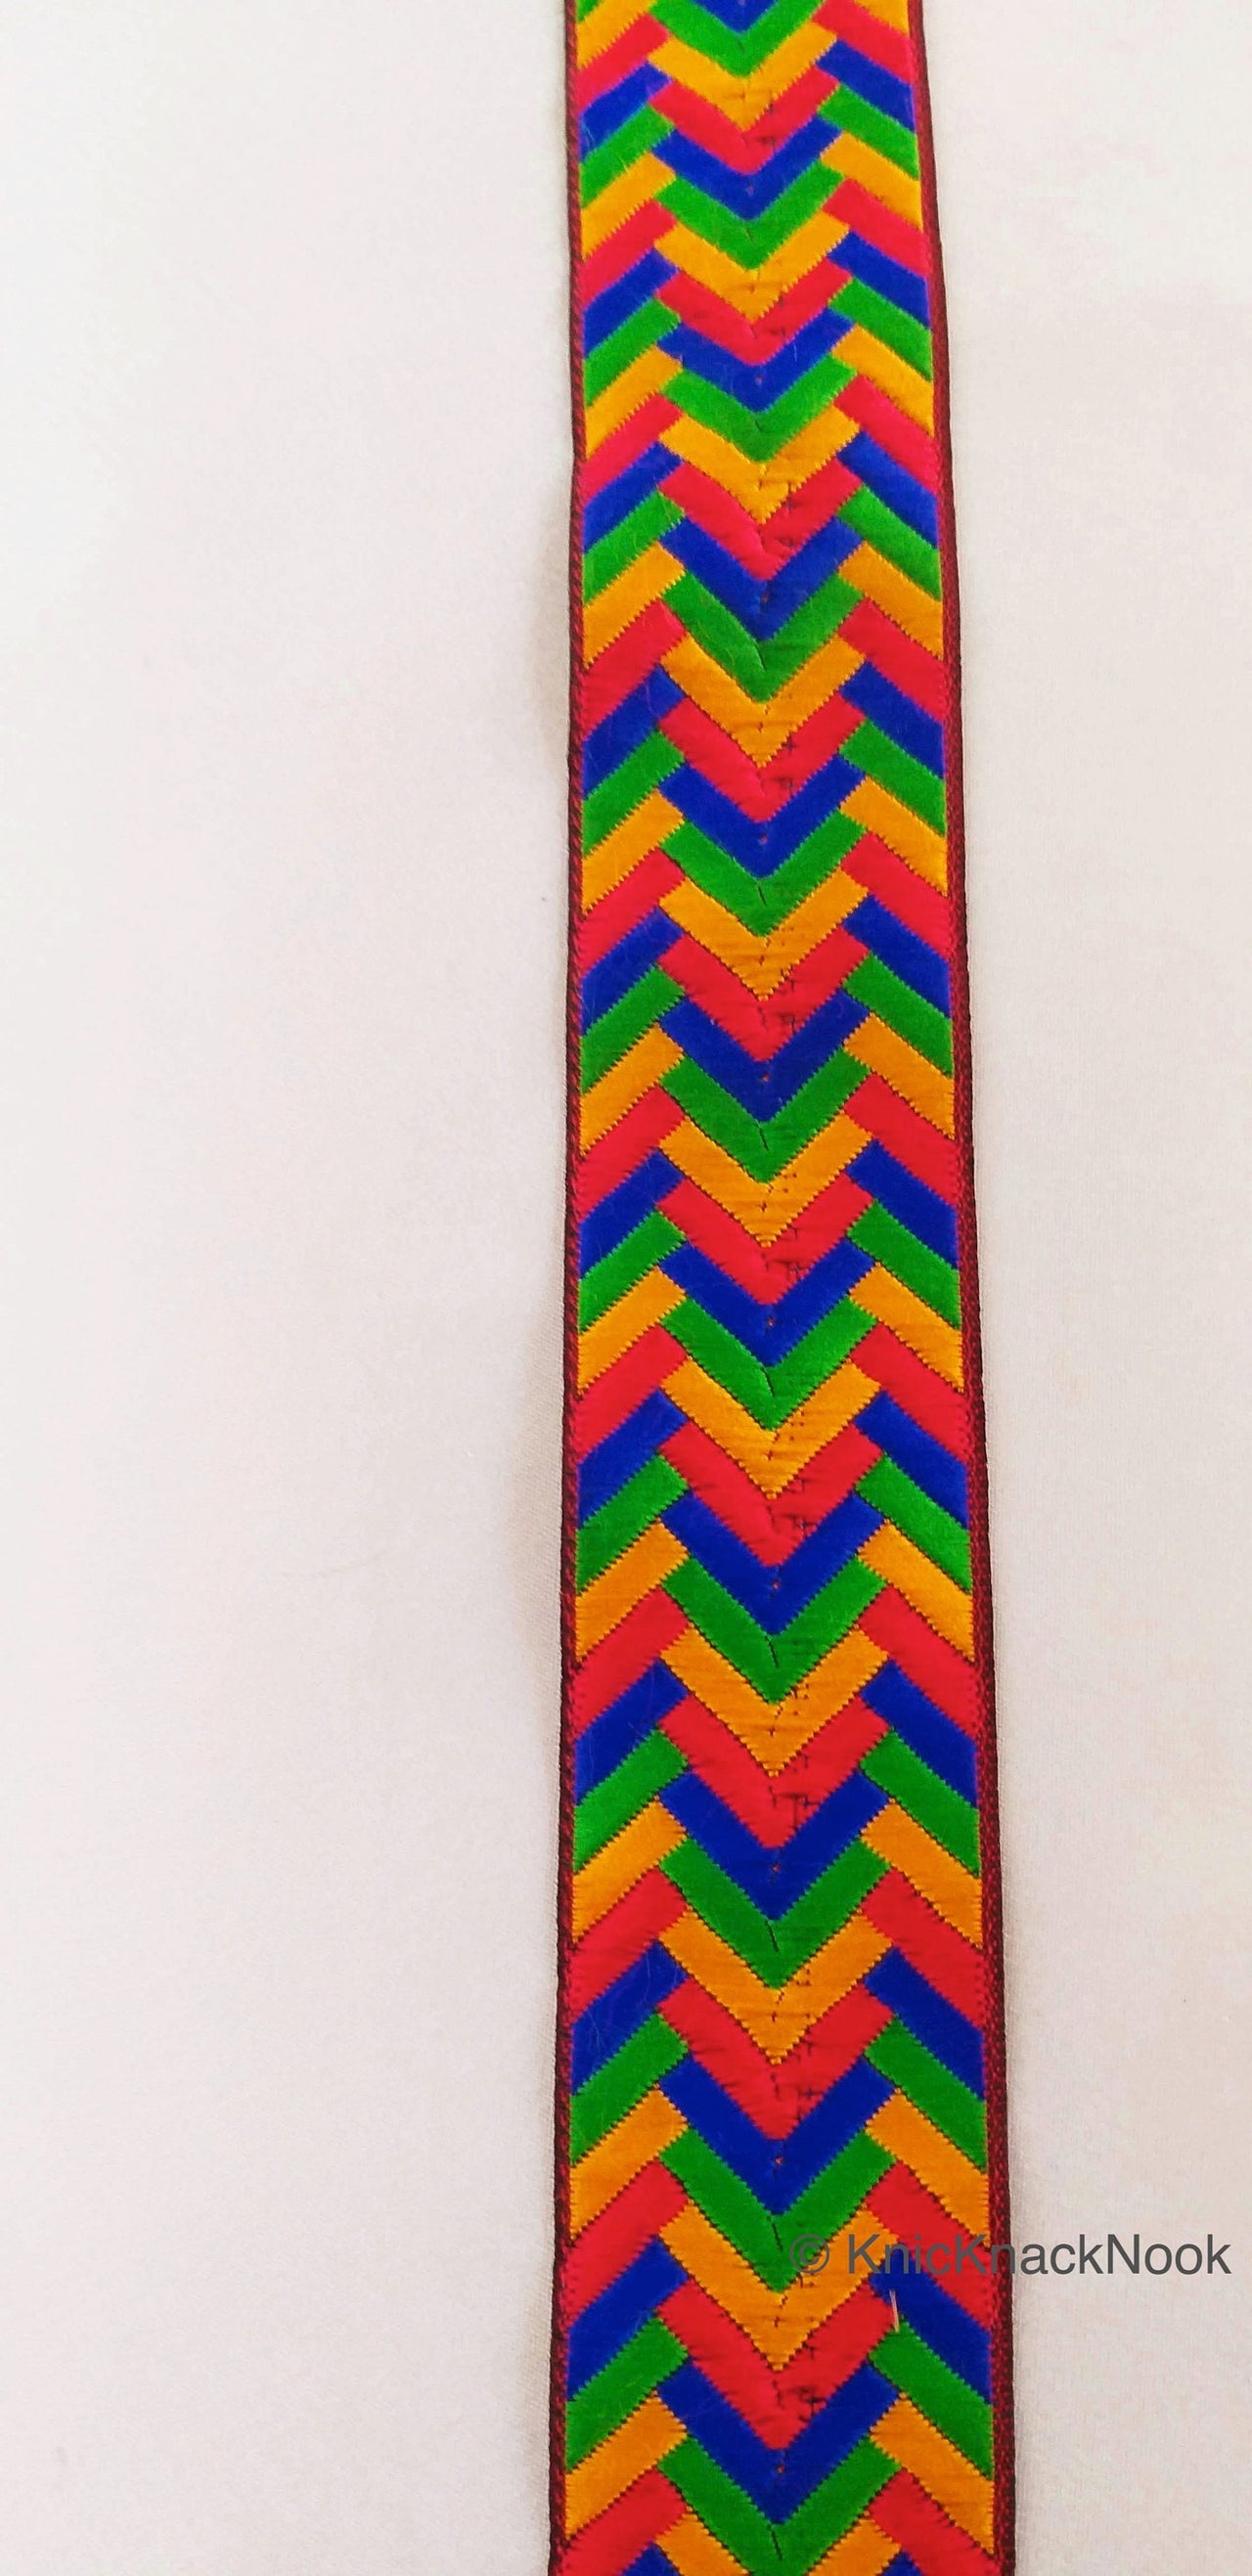 Yellow, Red, Blue and Green Jacquard Weave Trim